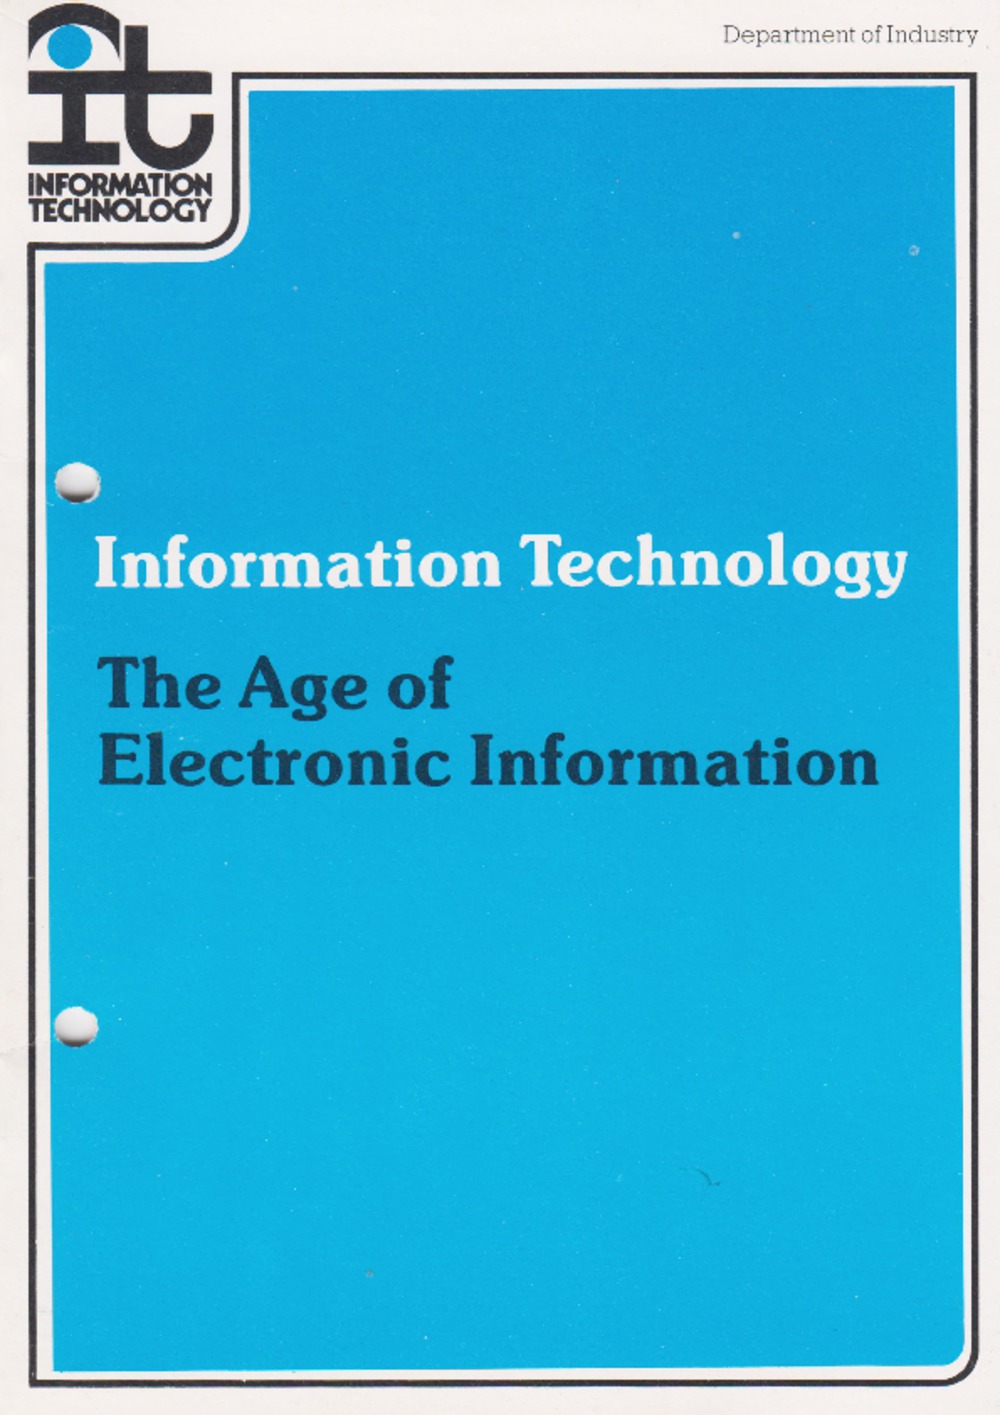 Article: Information Technology - The Age of Electronic Information